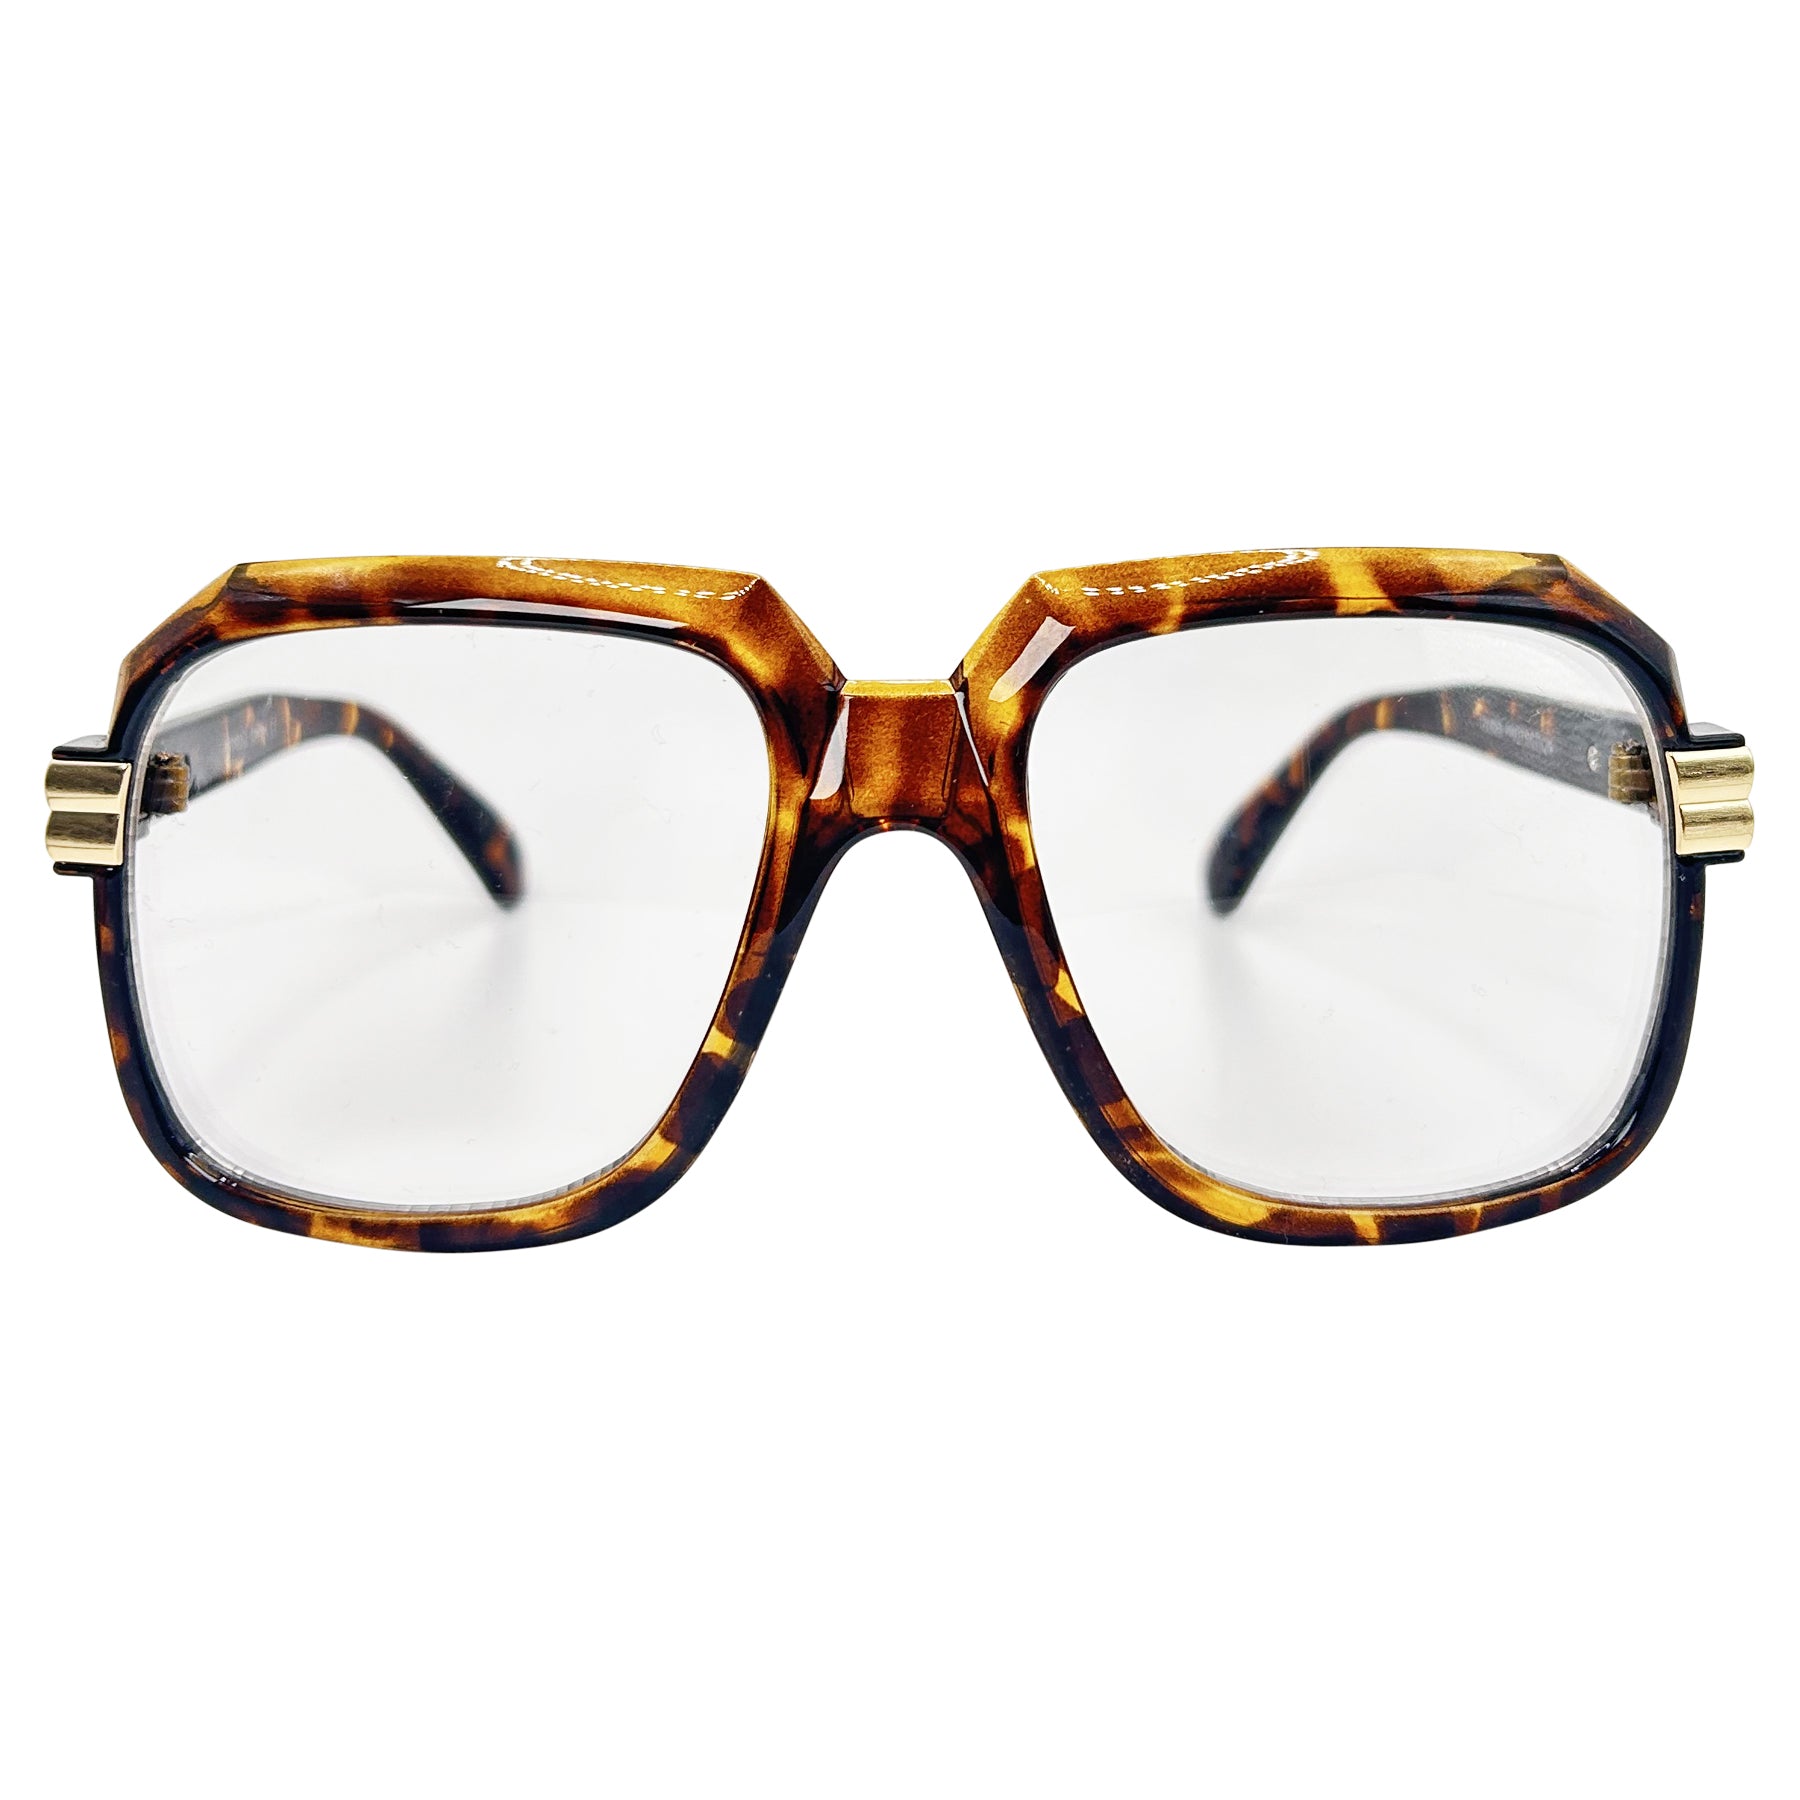 y2k glasses with a clear lens and tortoise shell frame